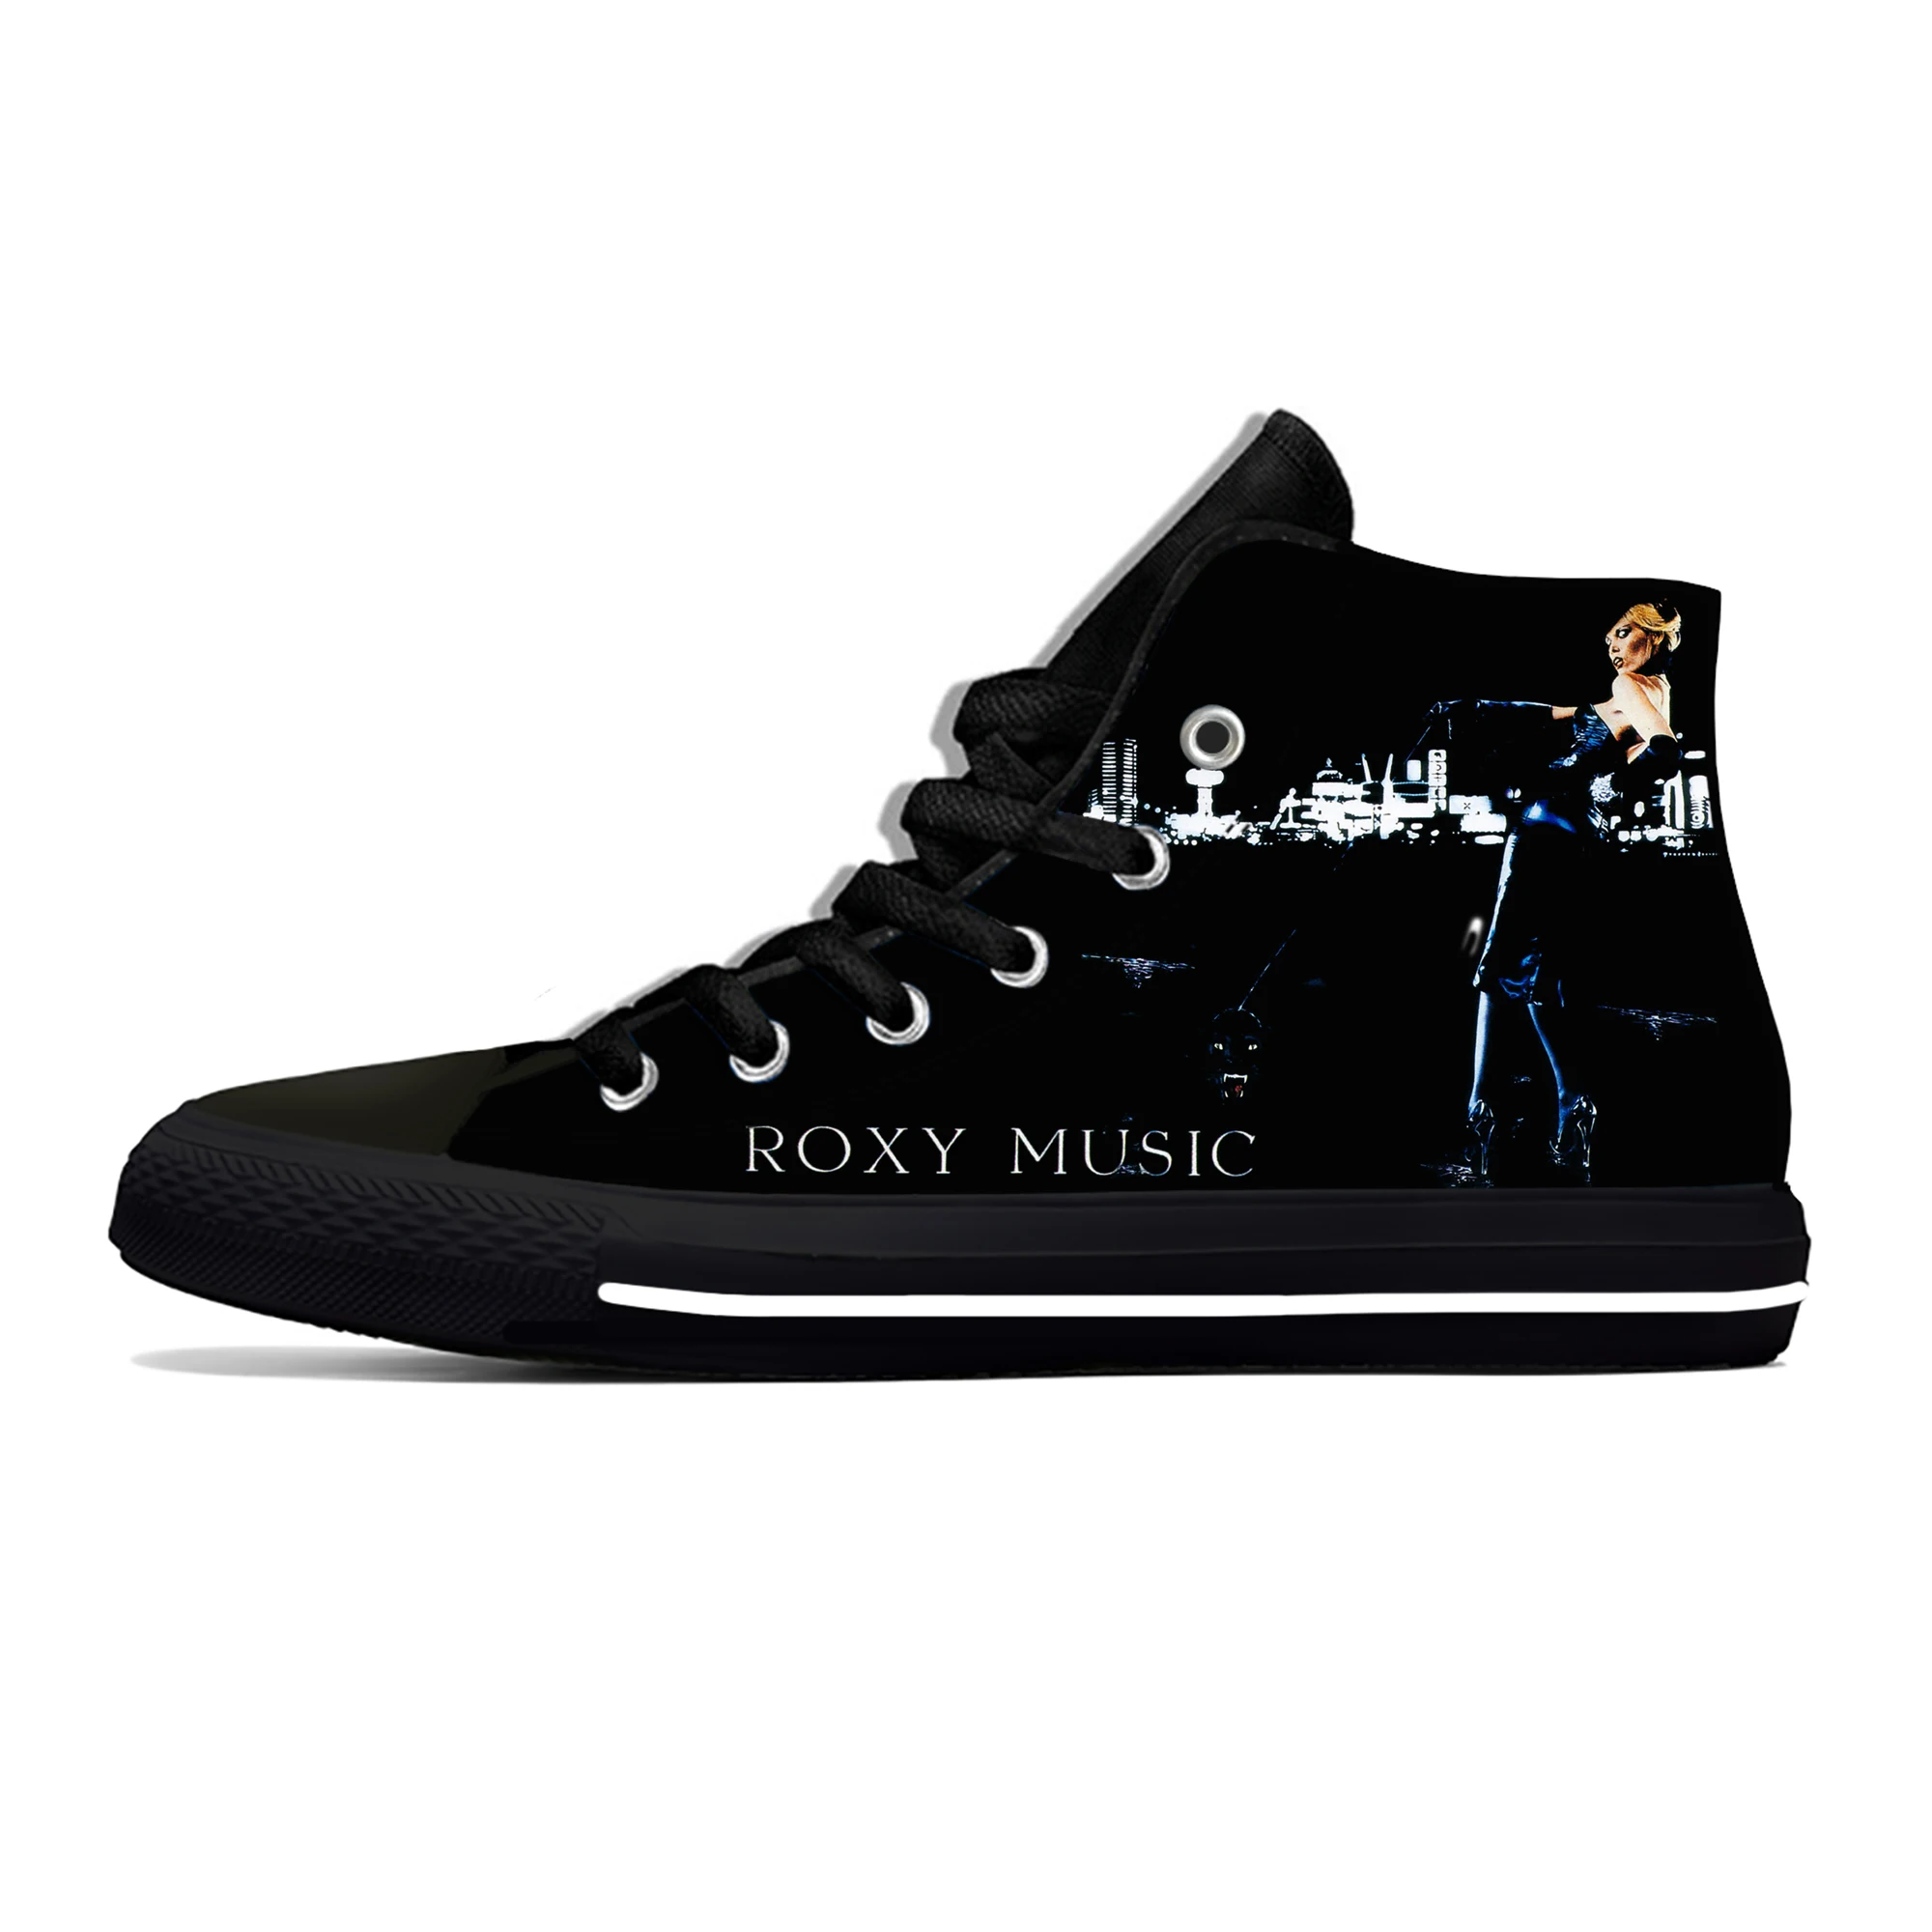 music for your pleasure high top sneakers mens womens teenager casual shoes roxy canvas running shoes 3d print lightweight shoe Music For Your Pleasure High Top Sneakers Mens Womens Teenager Casual Shoes Roxy Canvas Running Shoes 3D Print Lightweight shoe